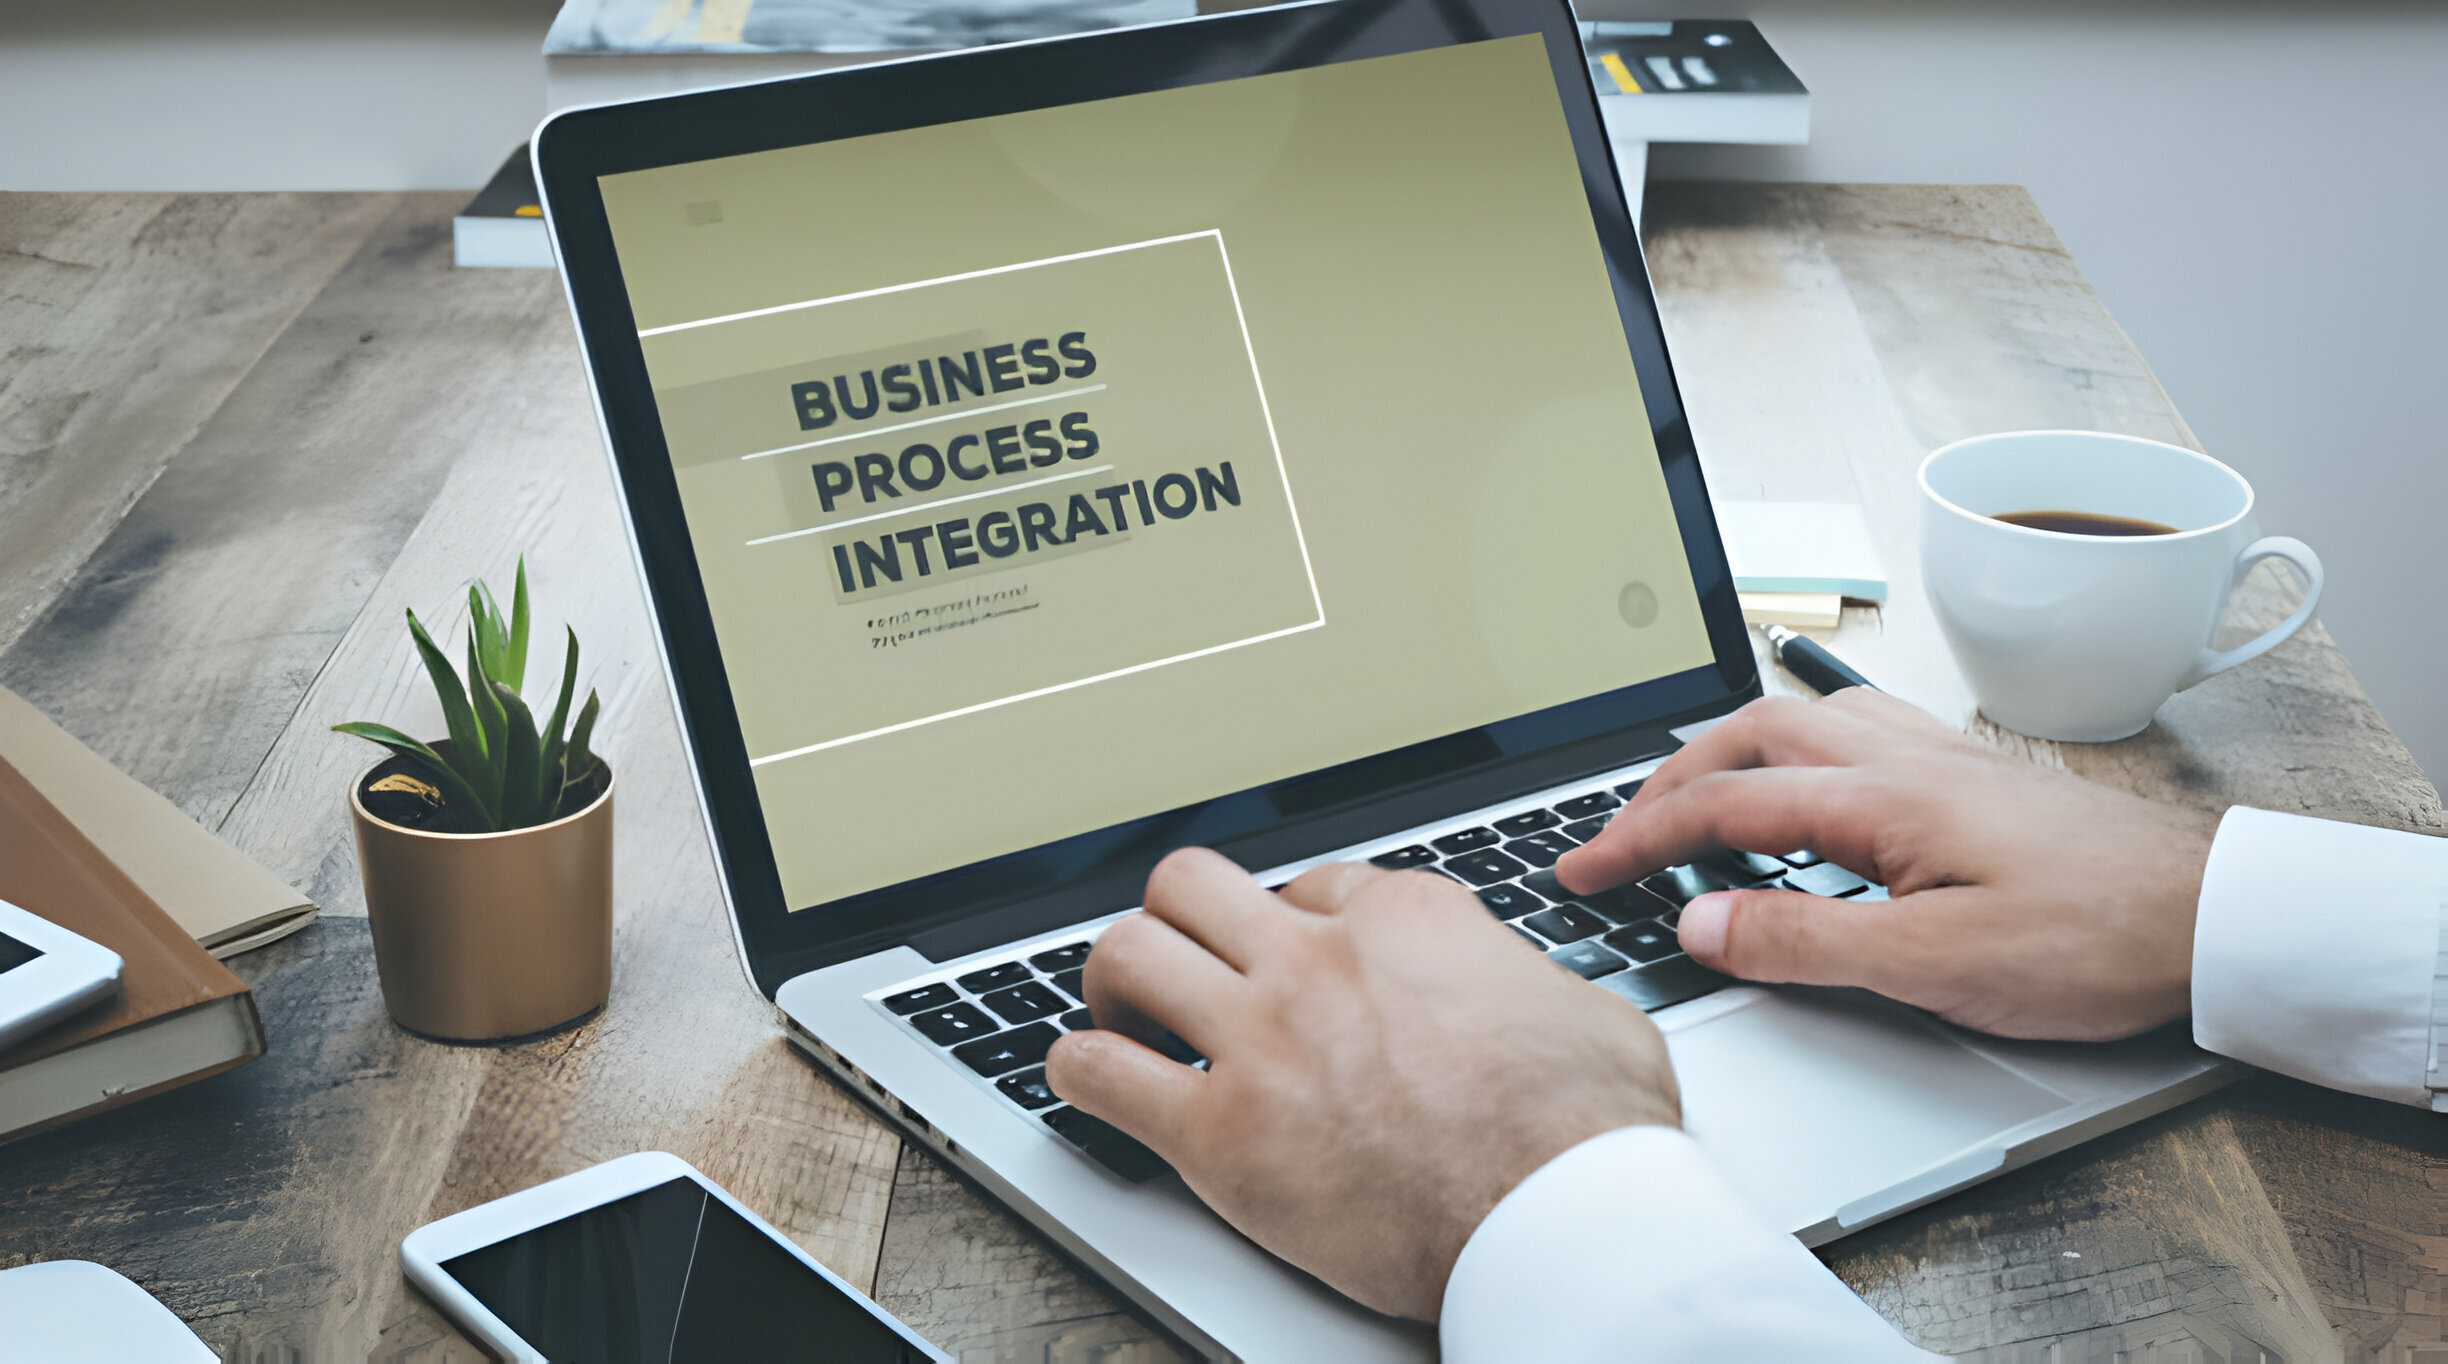 How does business process integration affect efficiency?